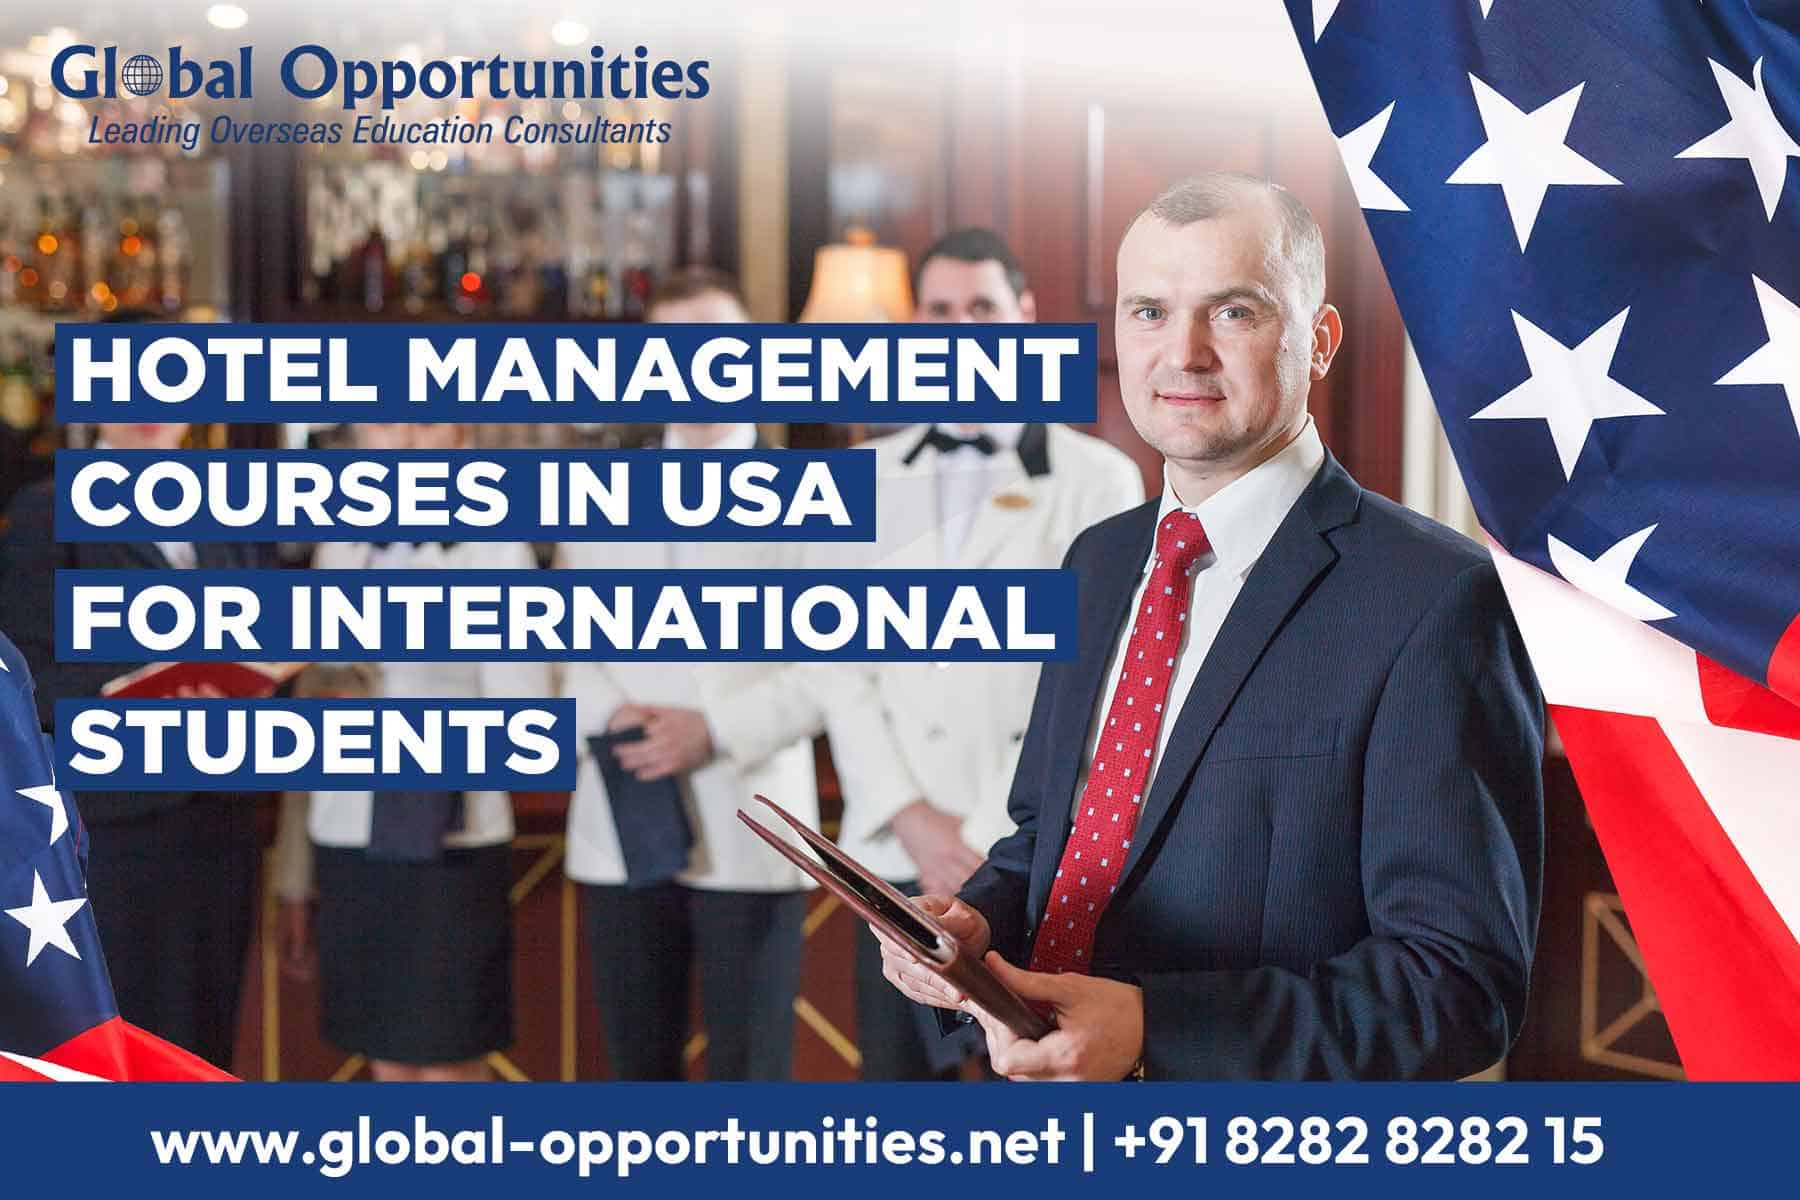 Hotel Management Courses in USA for International Students